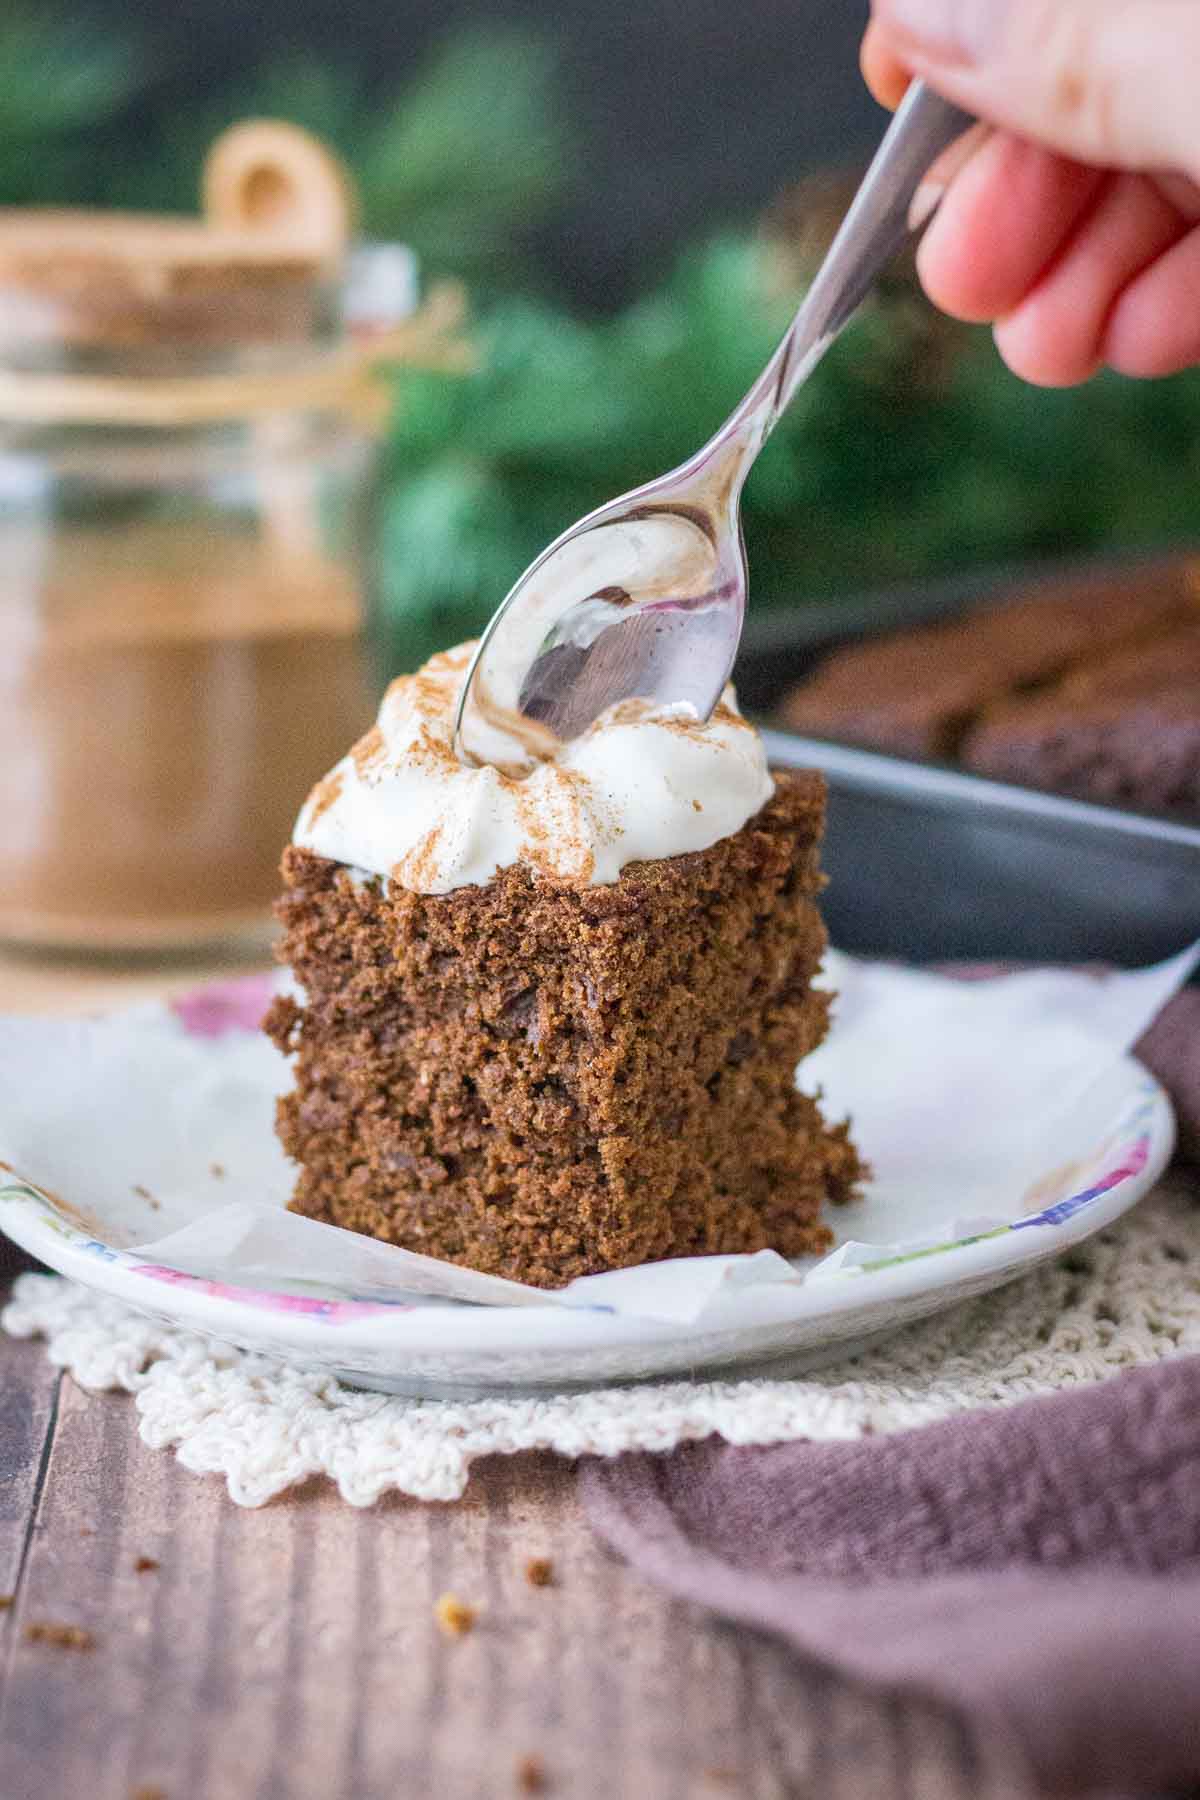 A slice of Gingerbread Cake topped with whipped cream served on a plate